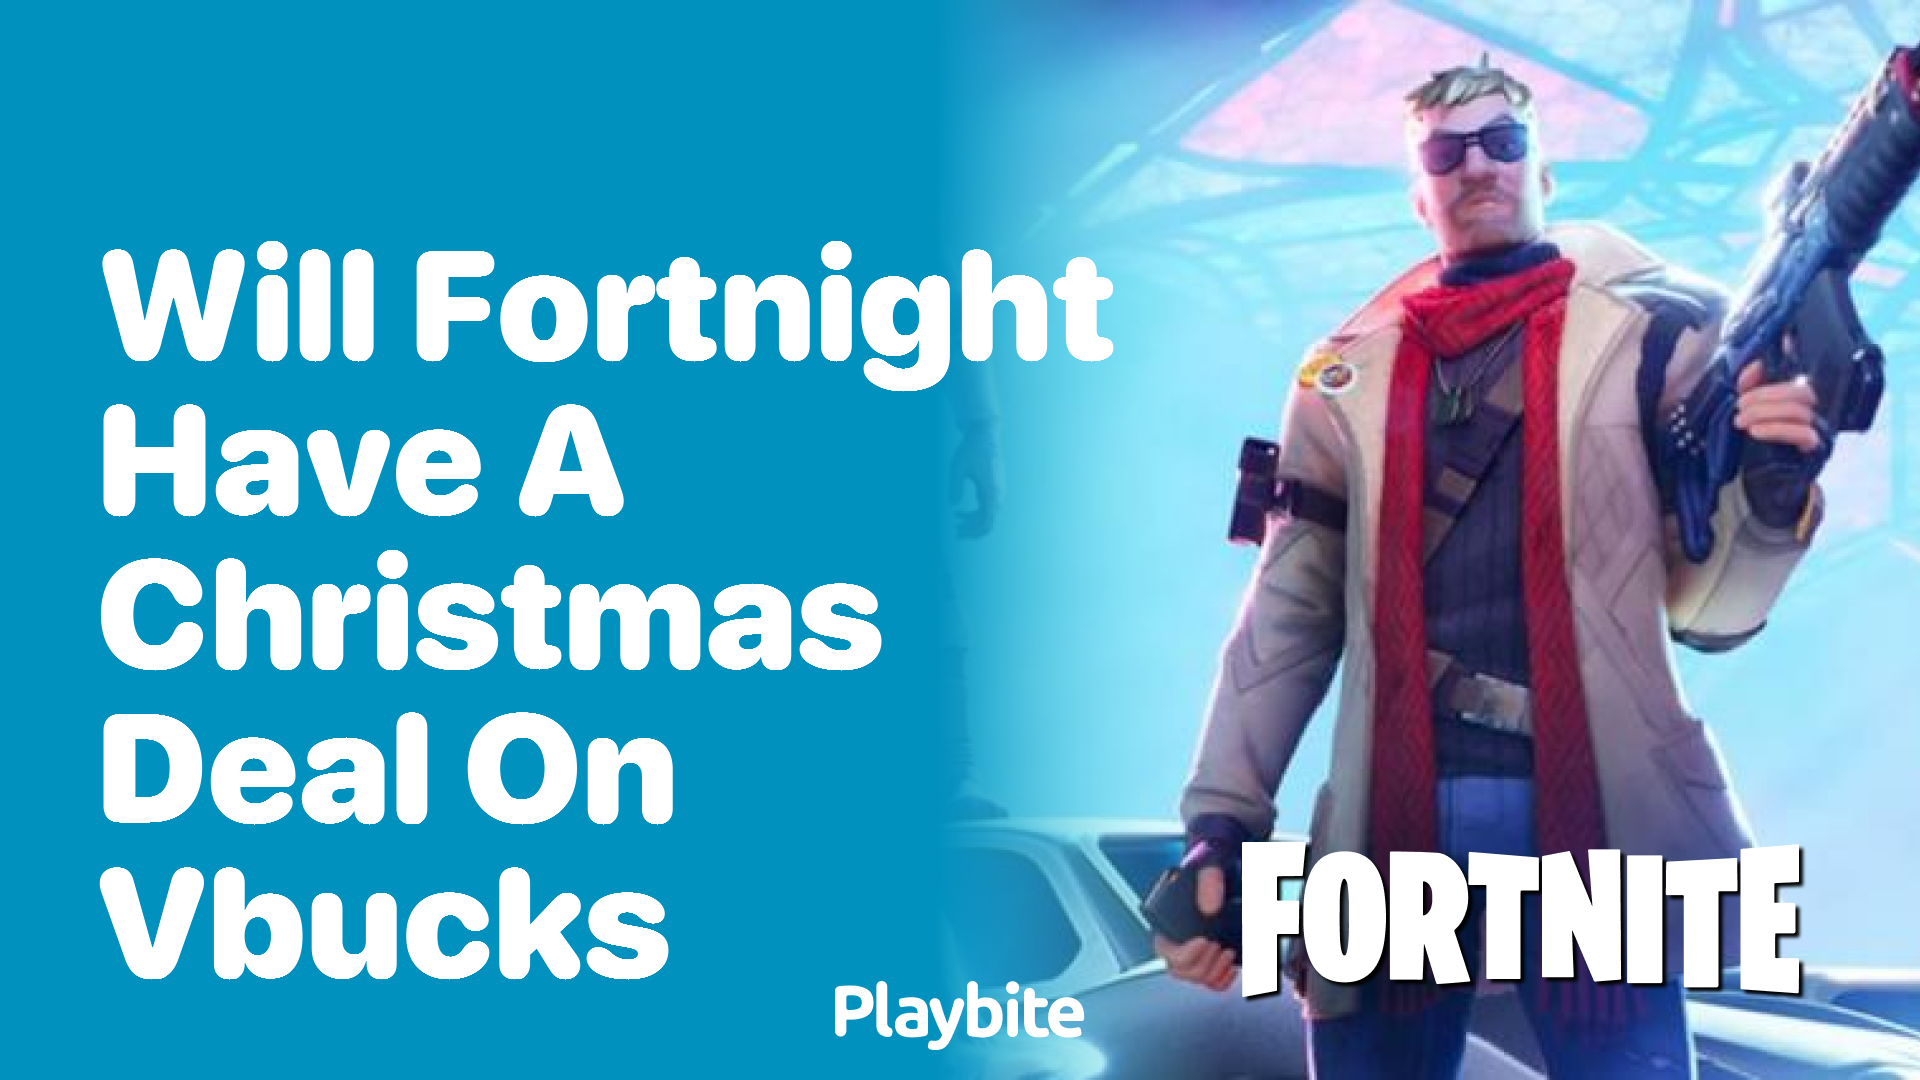 Will Fortnite Have a Christmas Deal on V-Bucks?